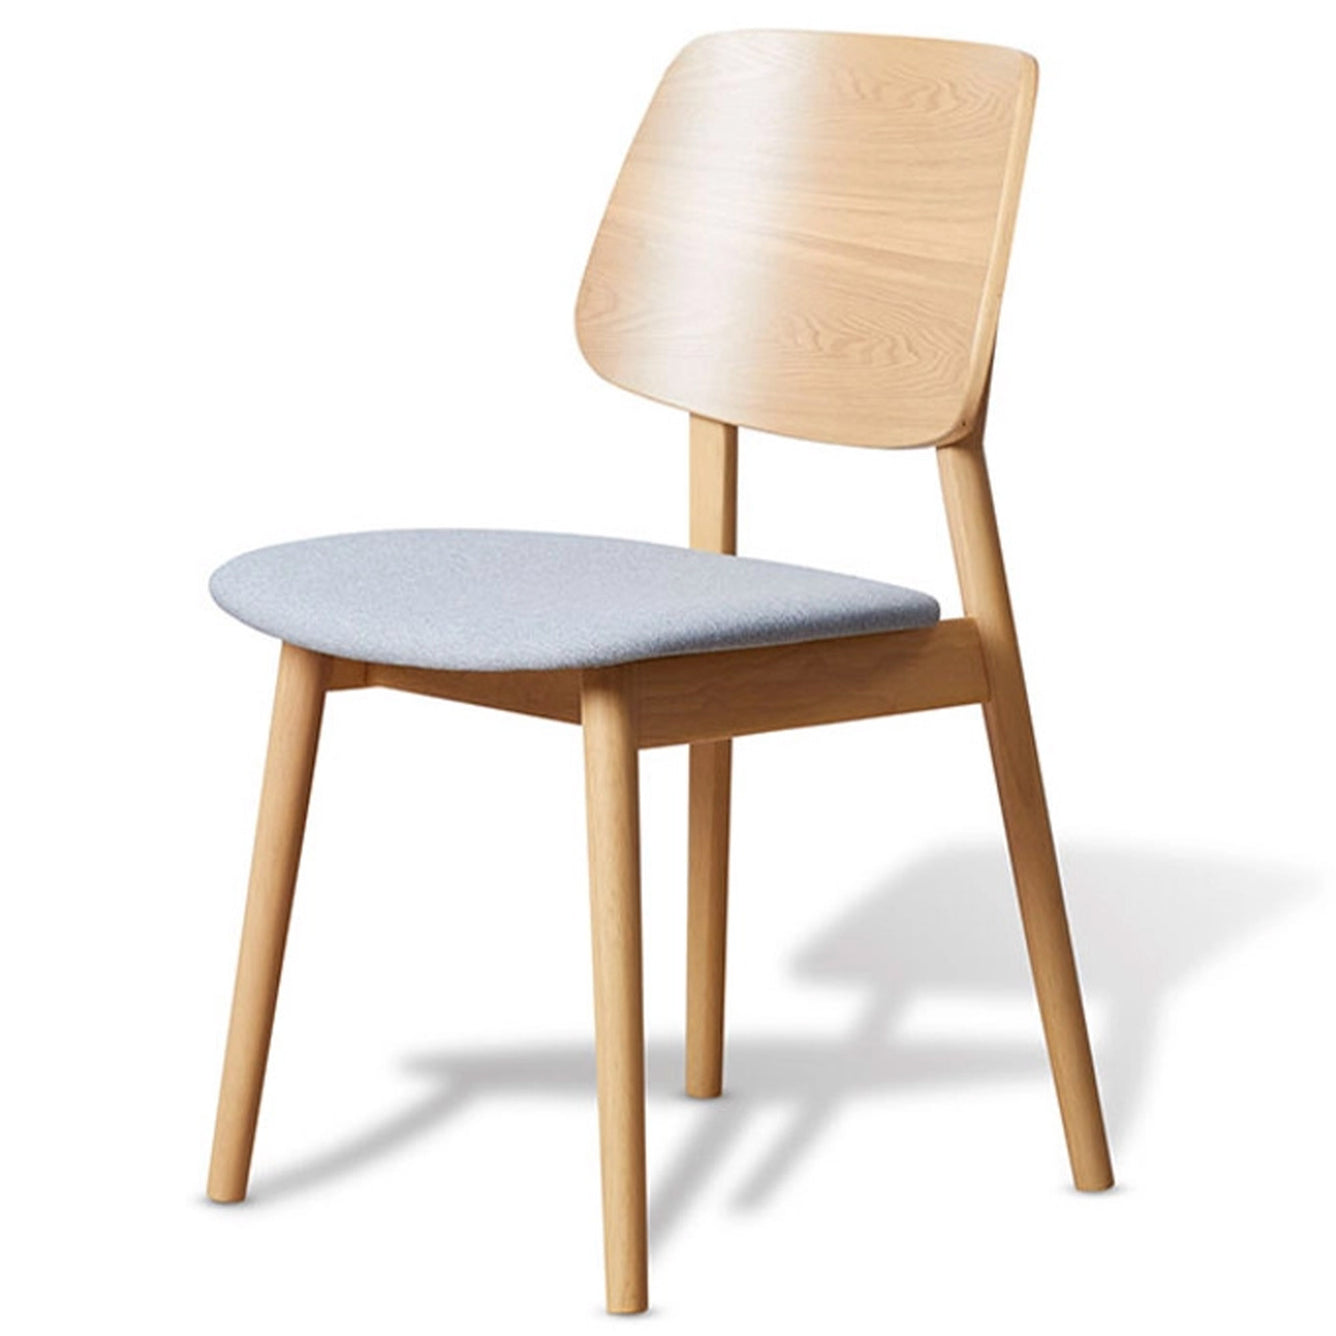 Half Pad Wooden Dining Chair